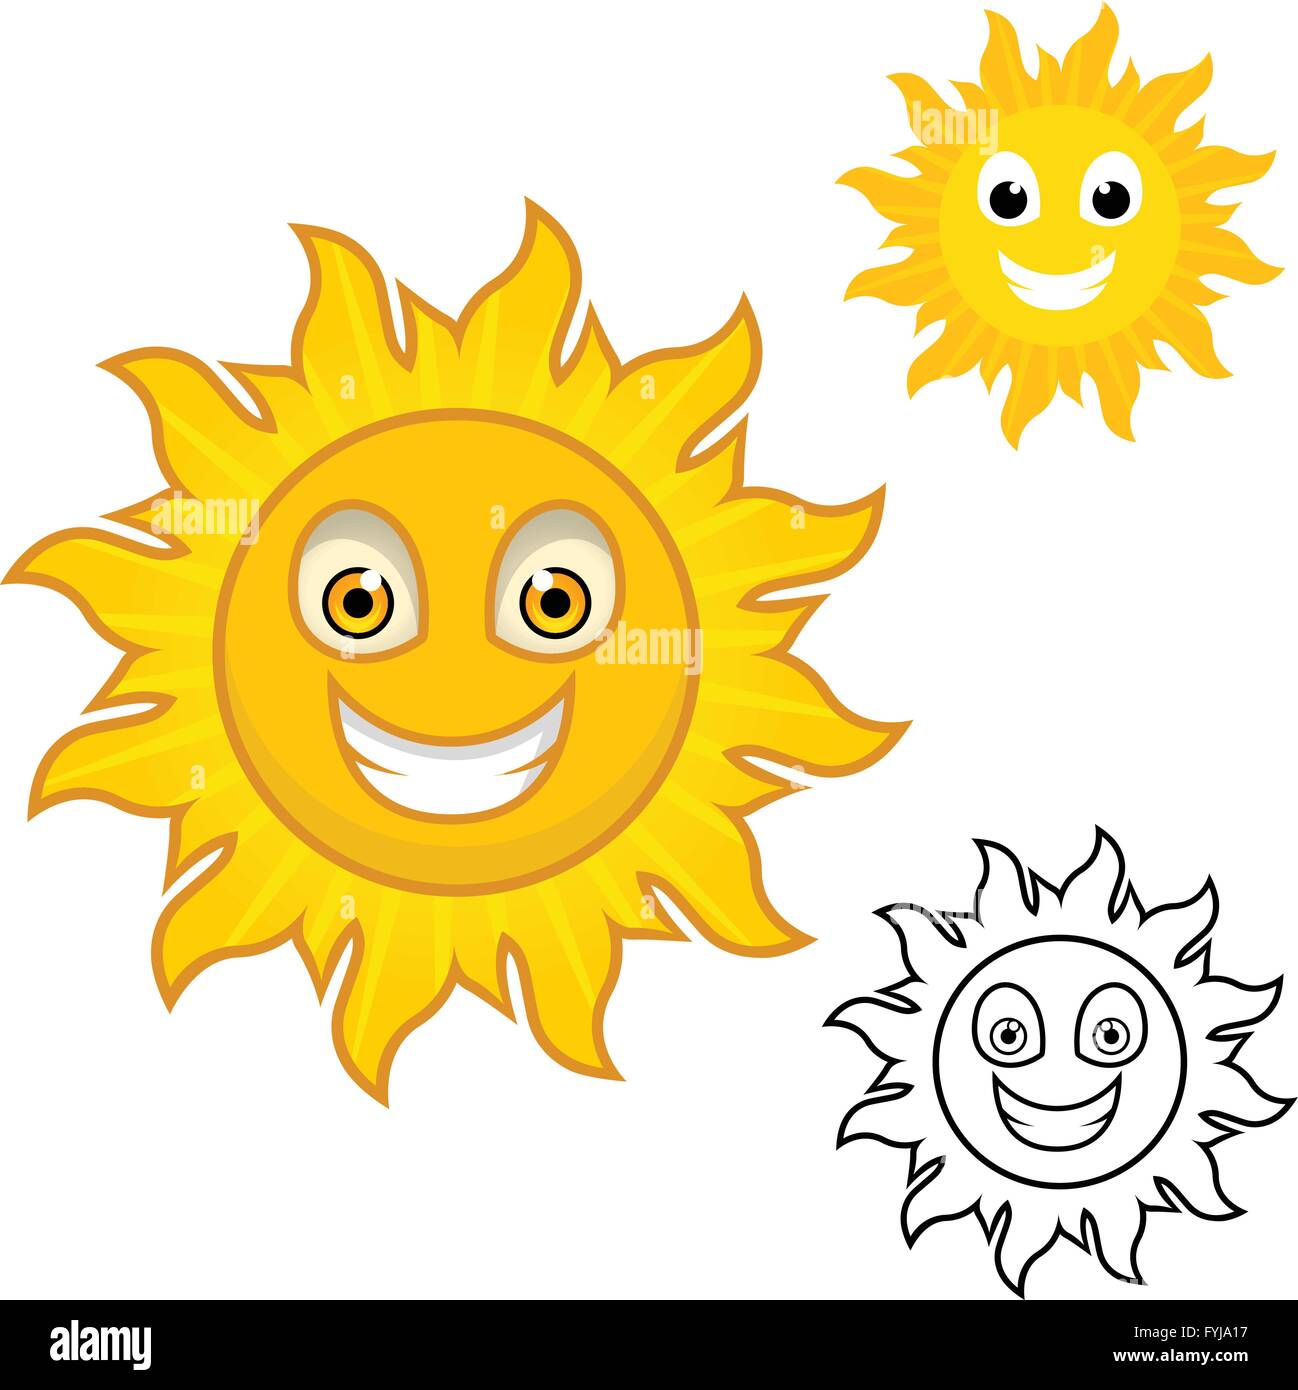 Sun Cartoon Character Include with Flat Design and Outlined Version Vector Illustration Stock Vector